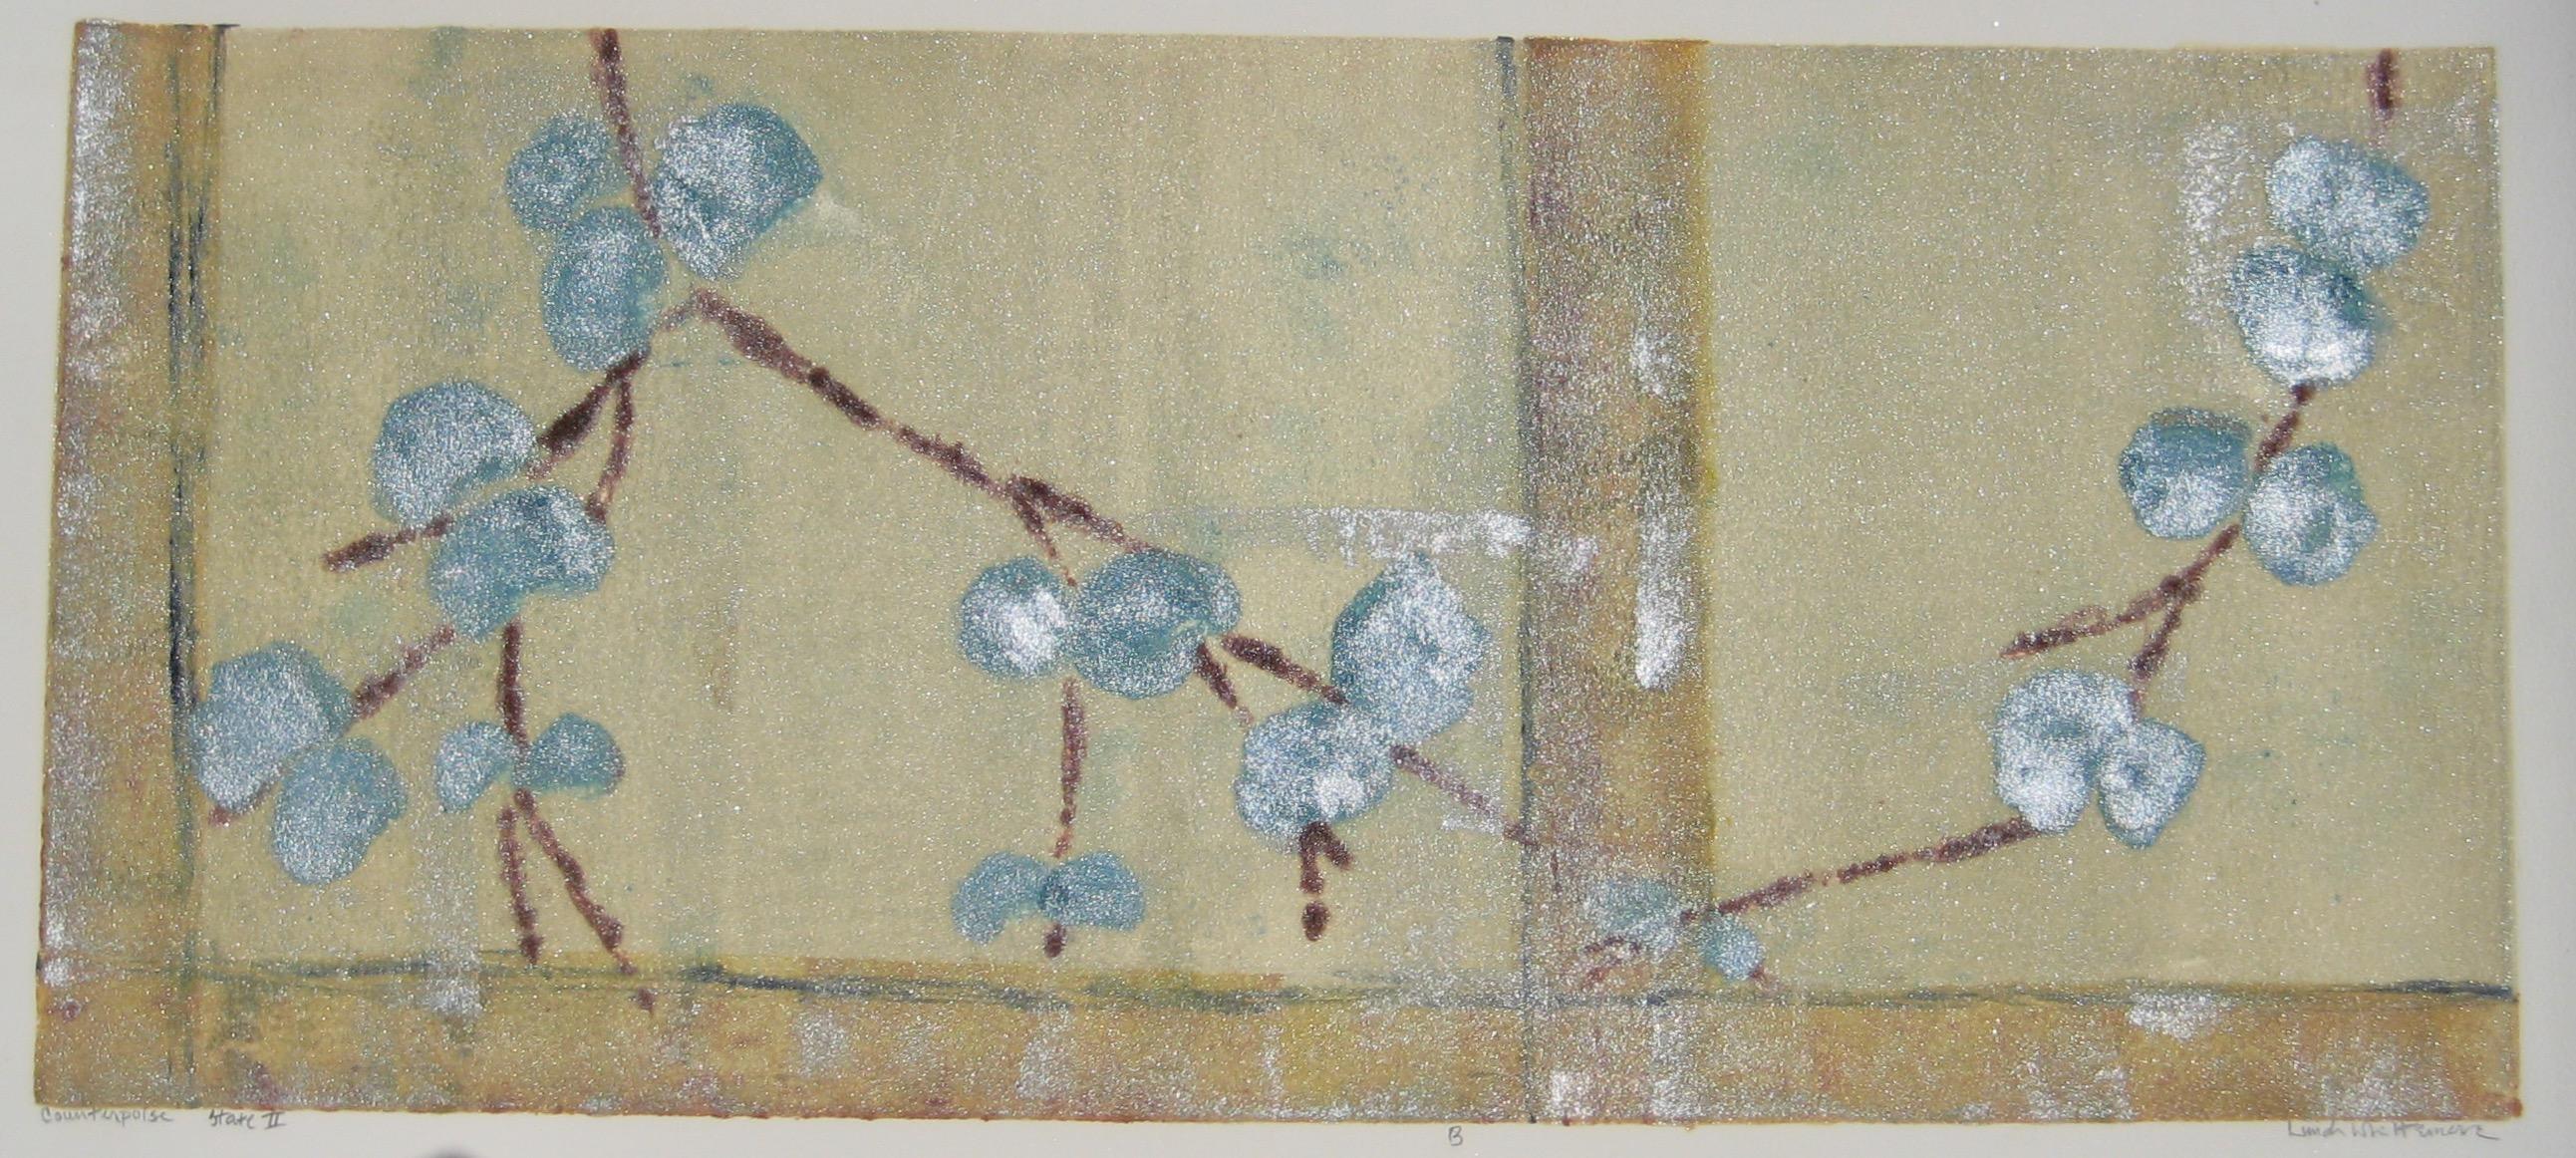 Soft blues, rust, yellow-golds, and sparkling accents play across this beautiful semi-abstract original work "Counterpoise State II 'B' " by master print maker Linda Whittemore. This mixed media viscosity monotype displays all of the unique skill